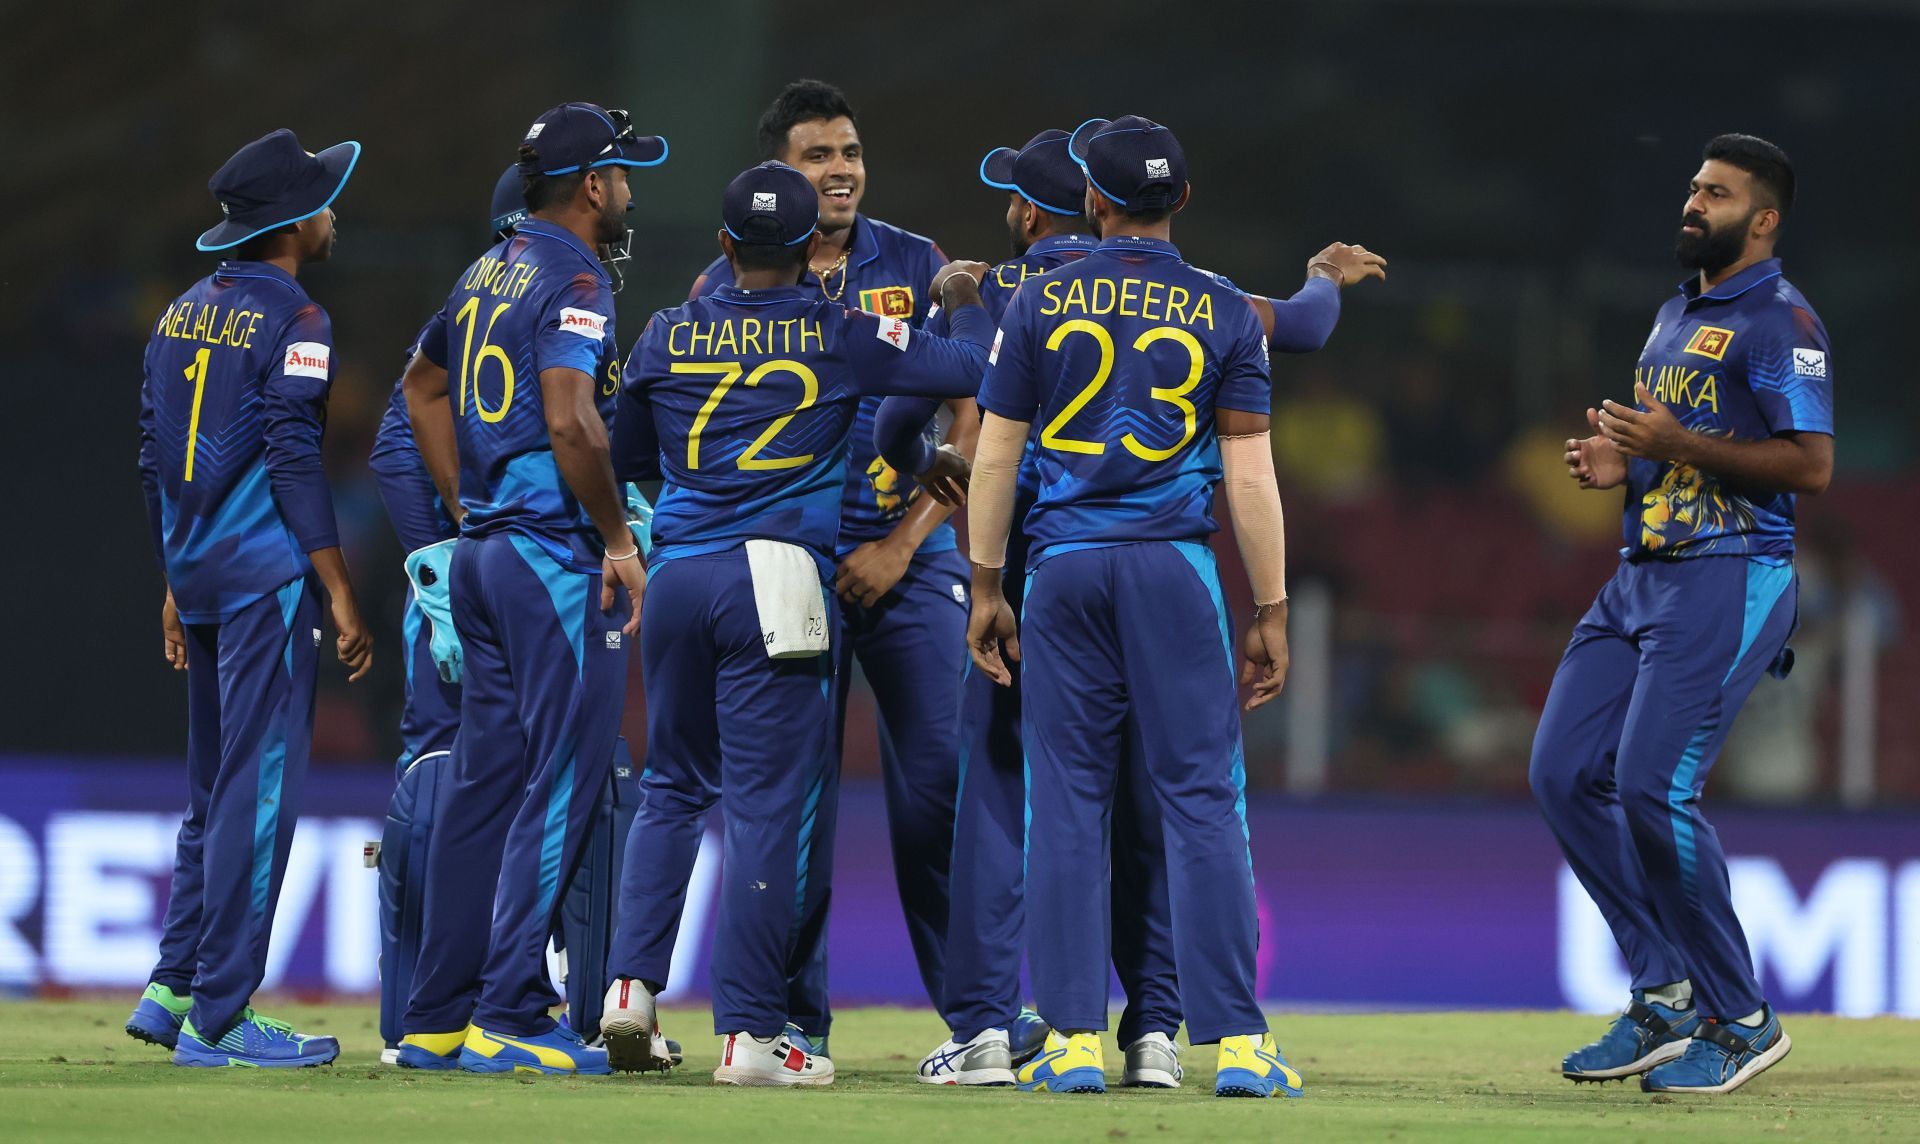 Sri Lanka nation team at the 2023 ODI World Cup [Getty Images]